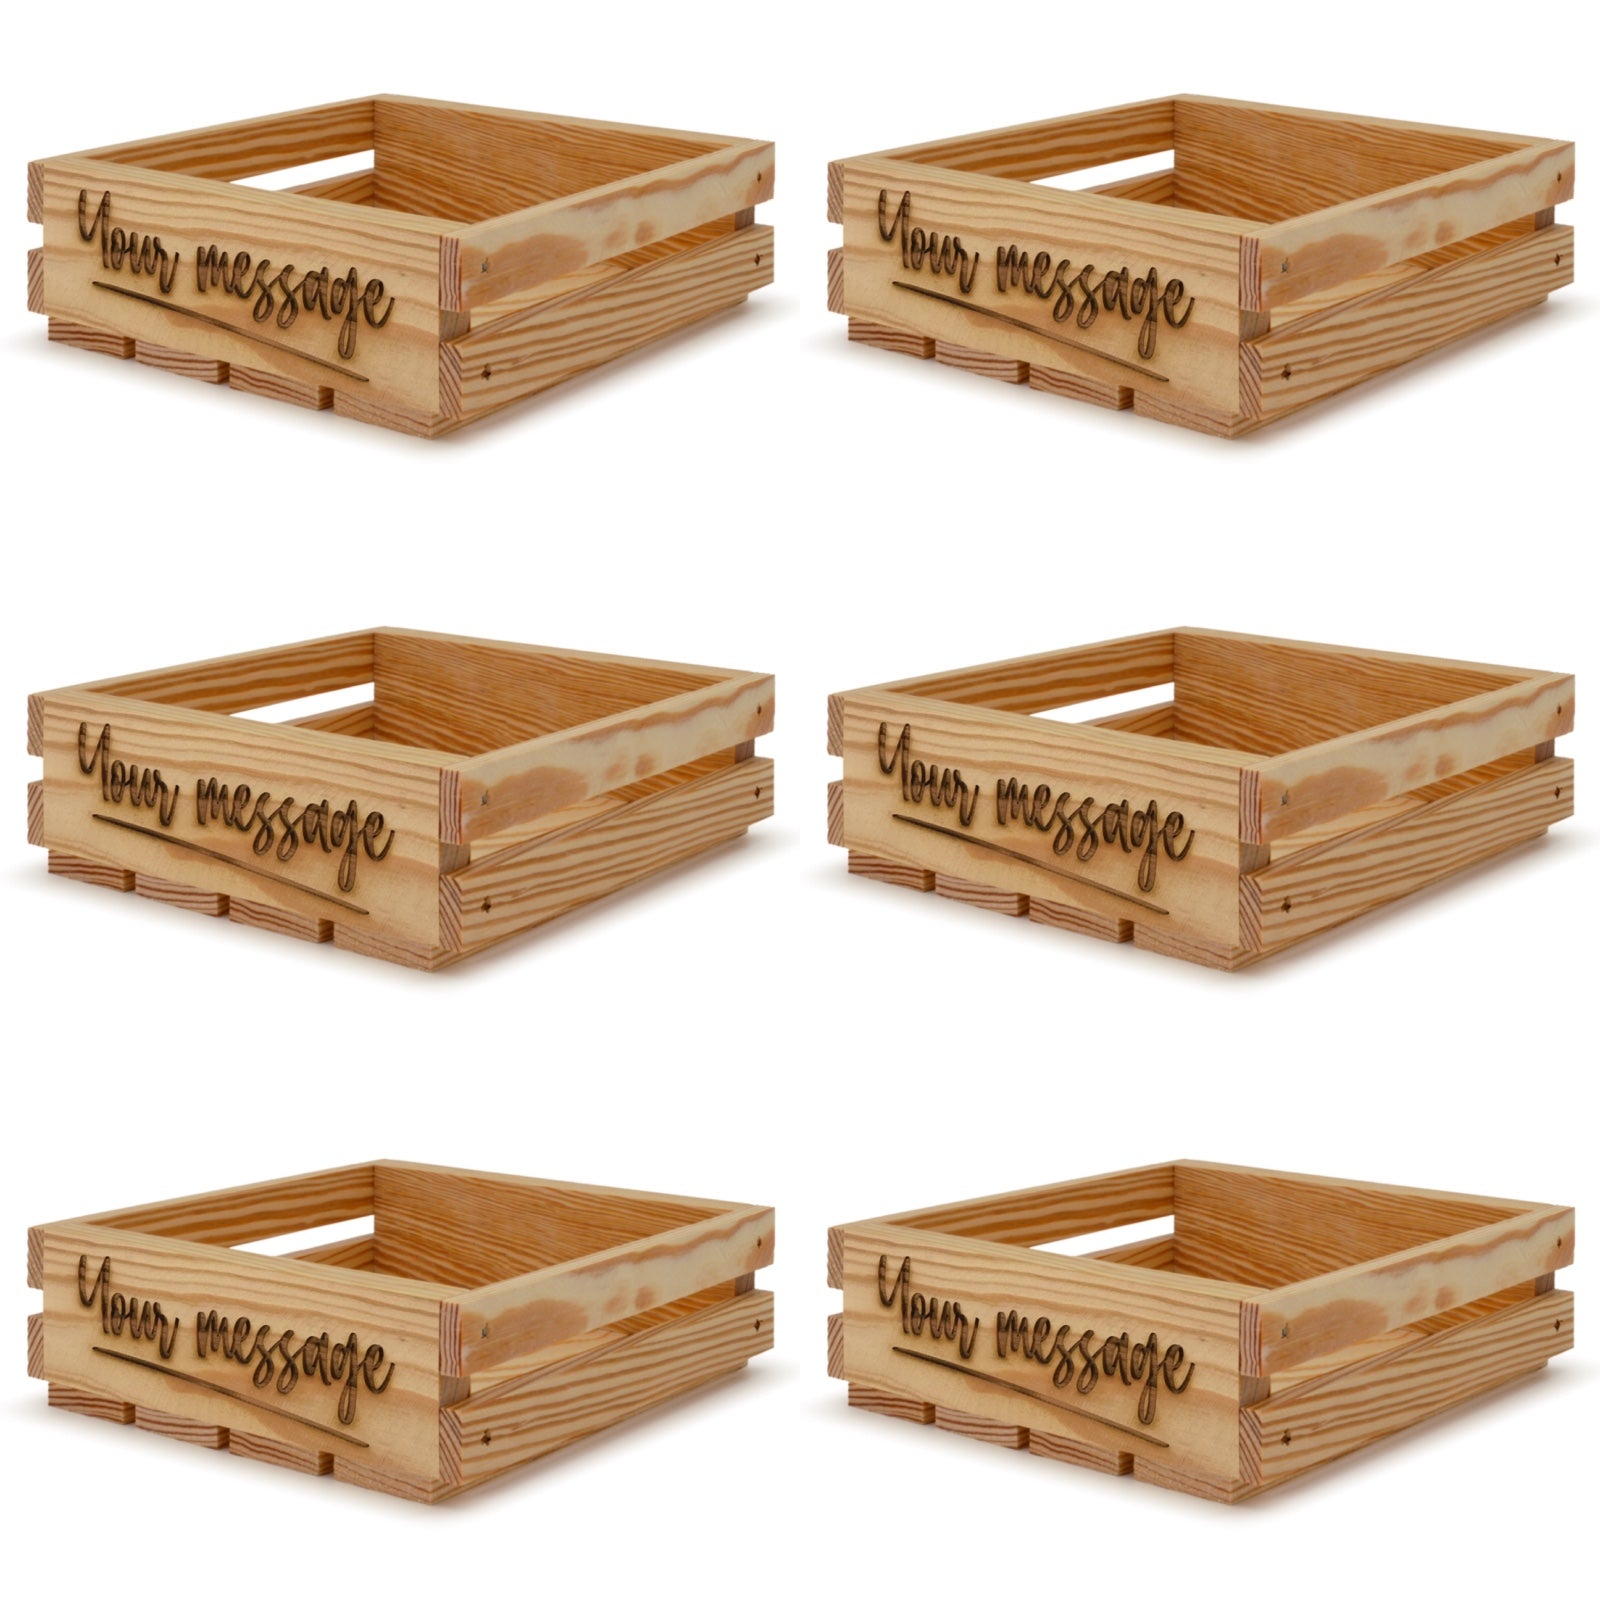 6 Small wooden crates 8x8x2.5 your message included